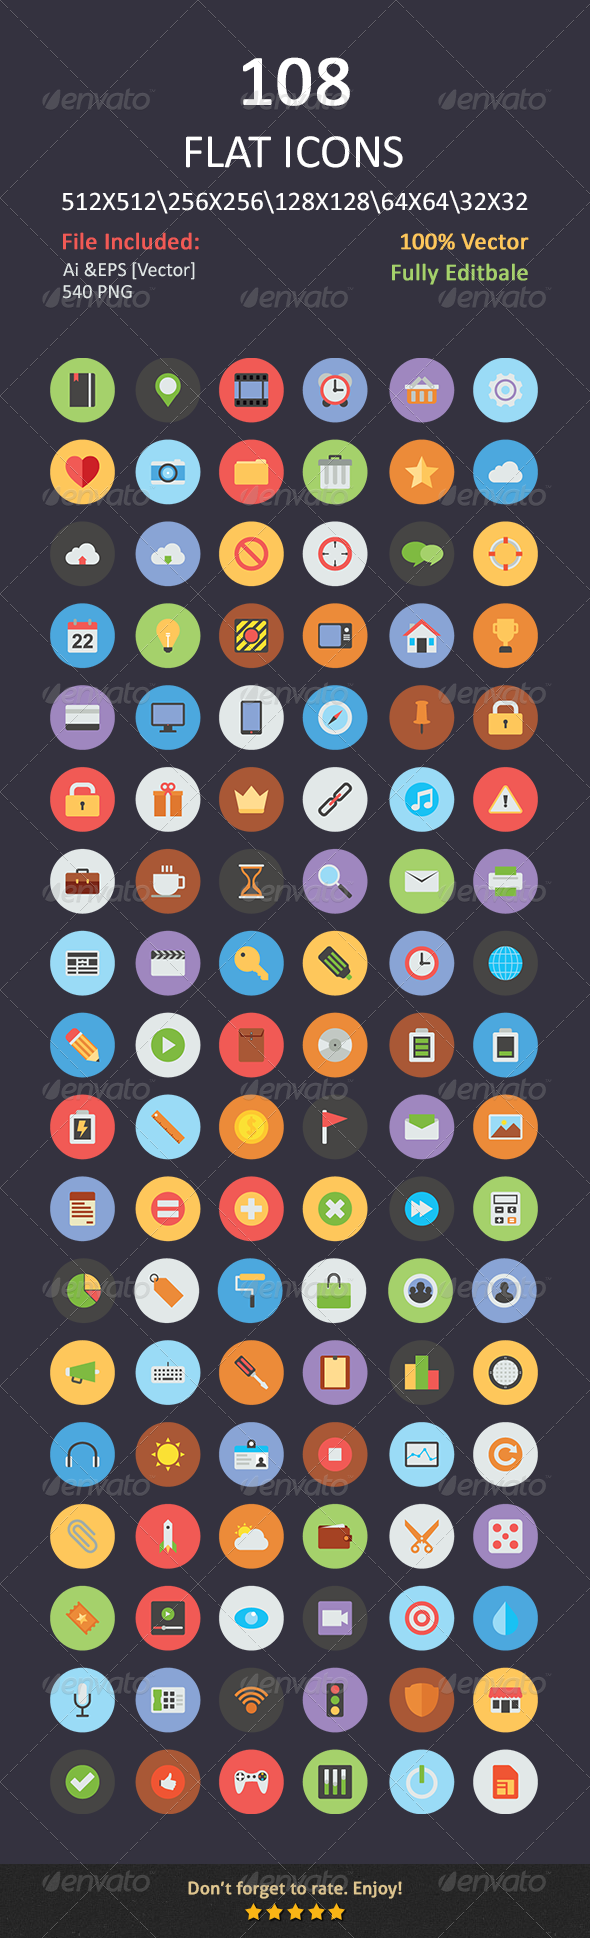 free flat icon pack